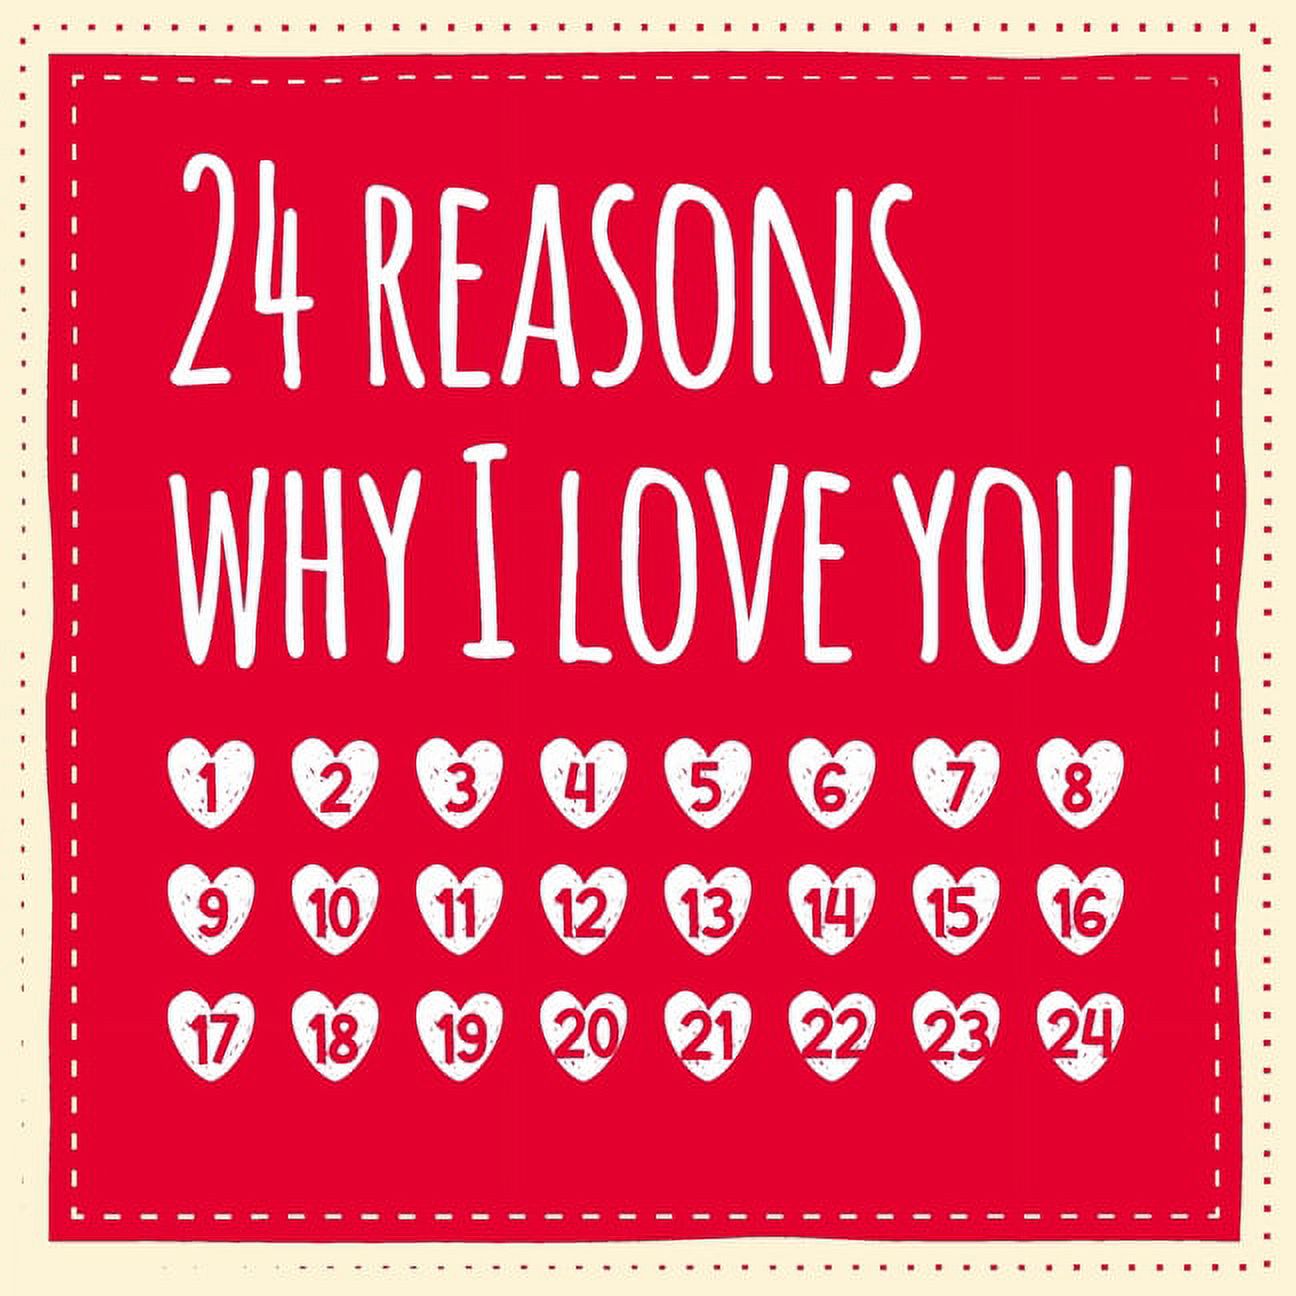 24 reasons why I love you Advent calendar book to fill out gift for